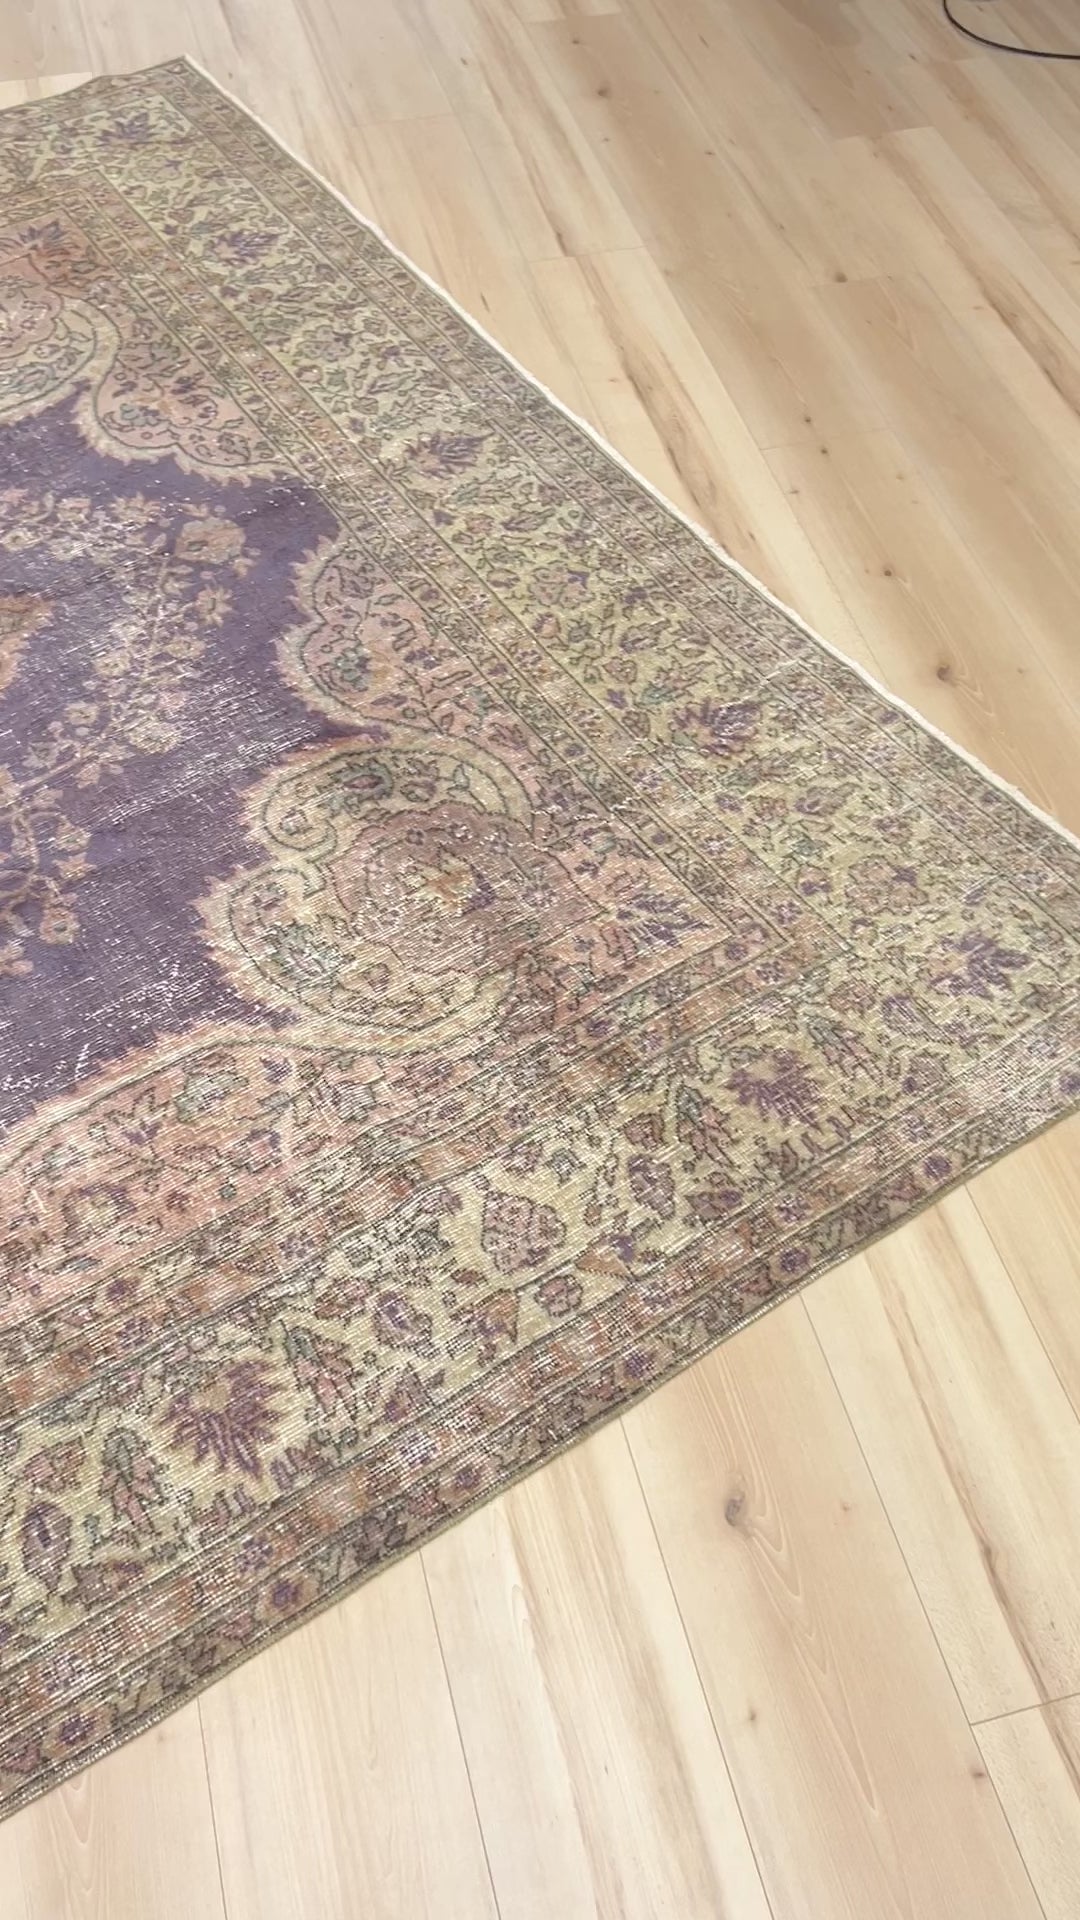 Muted Vintage Turkish Rug. Overdyed distressed rug. Turkish rug shop San Mateo CA. Modern minimalist turkish rug for living room, bedroom, dining, office. Oriental rug shop san francisco bay area. Buy rugs obline rug shopping free shipping to USA, Canada.